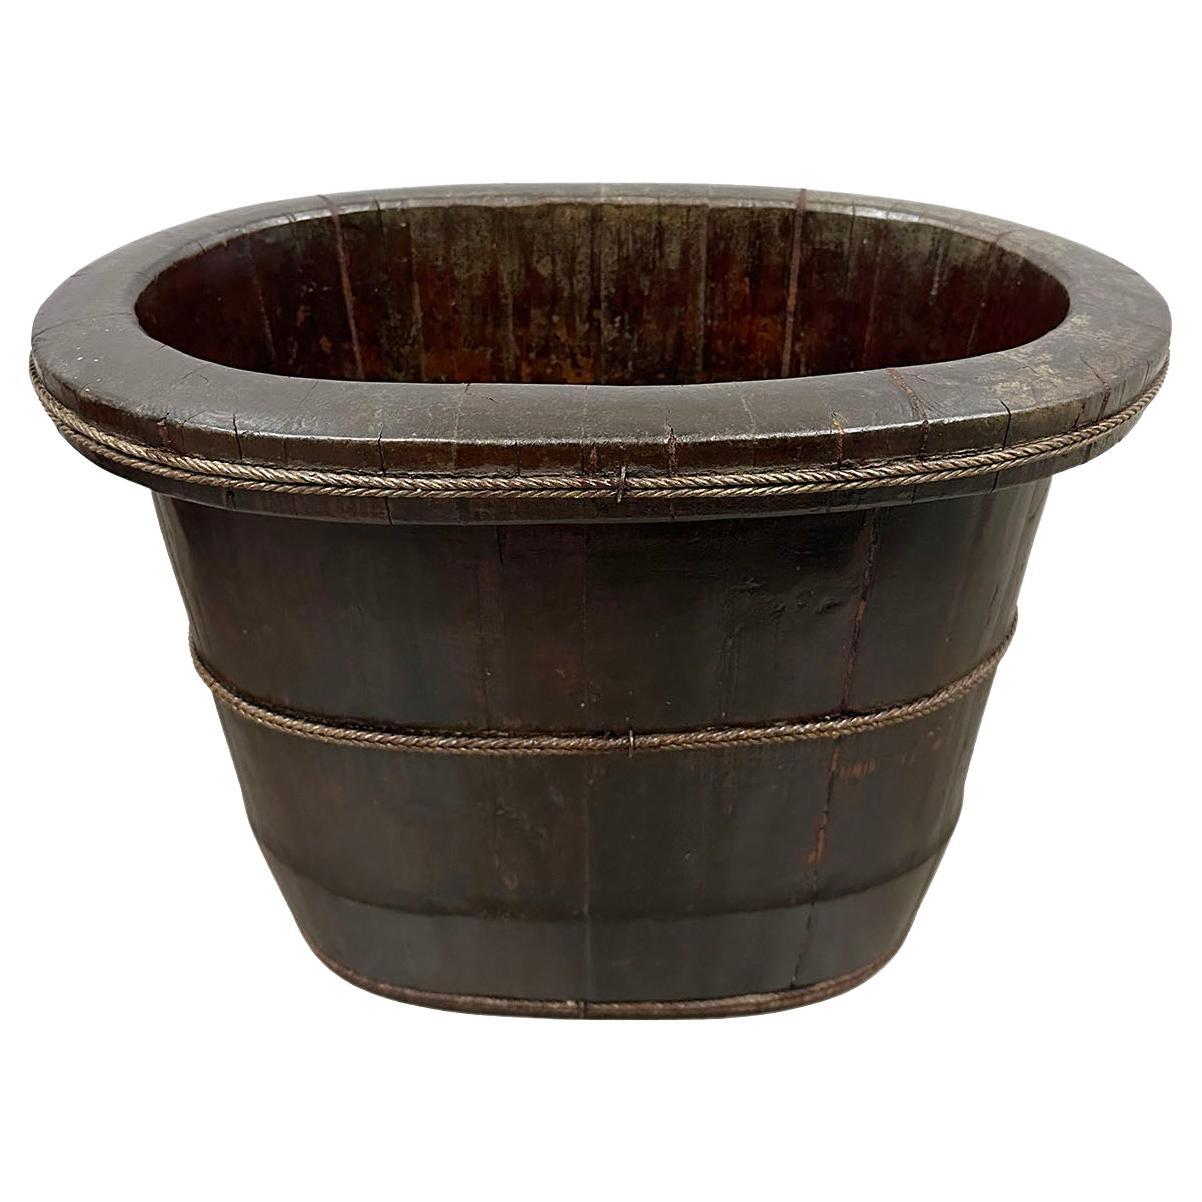 Late 19th Century Chinese Hand Made Wooden Wash/Laundry Basin For Sale